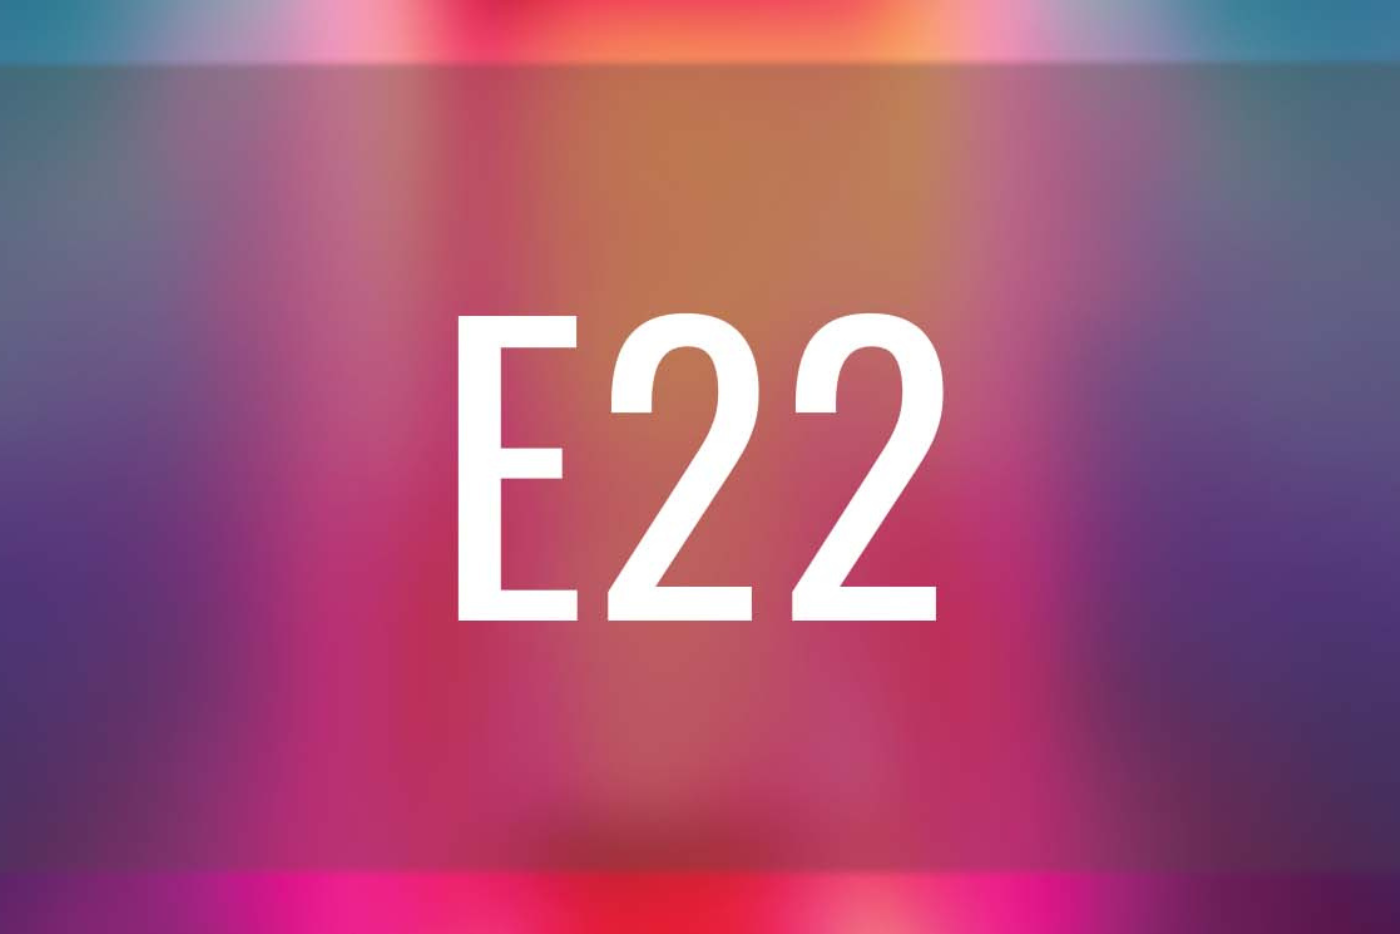 E22 – Editions Banner Image